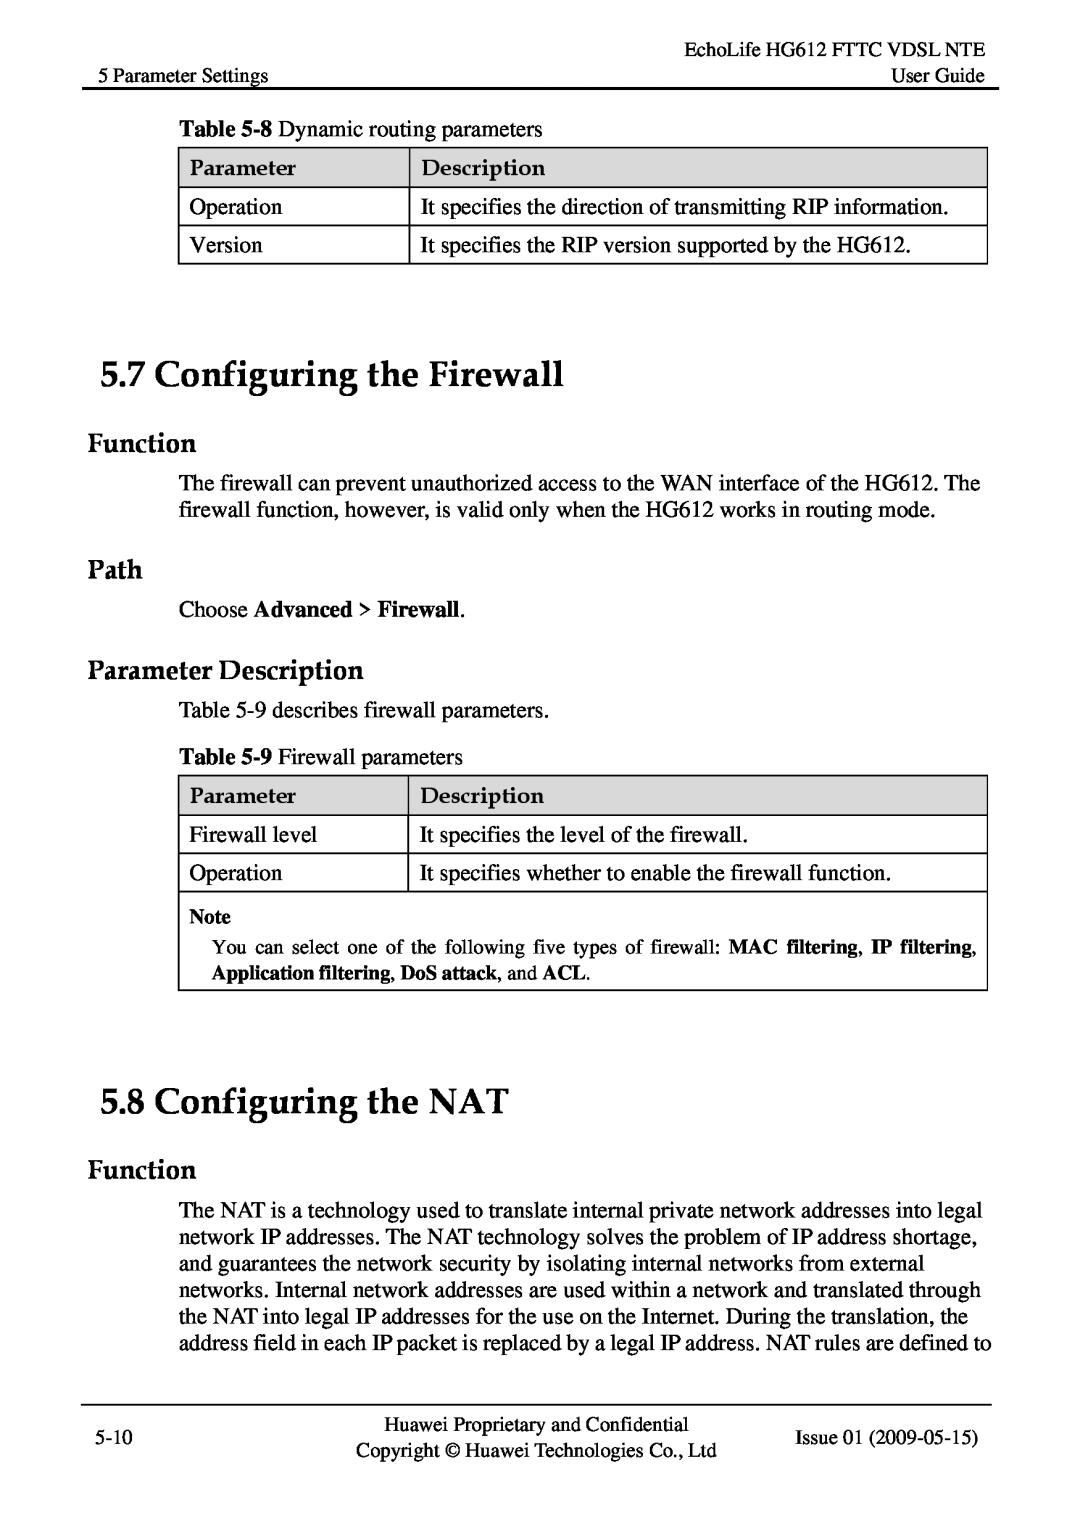 Huawei HG612FTTC VDSL NTE manual Configuring the Firewall, Configuring the NAT, Function, Path, Parameter Description 